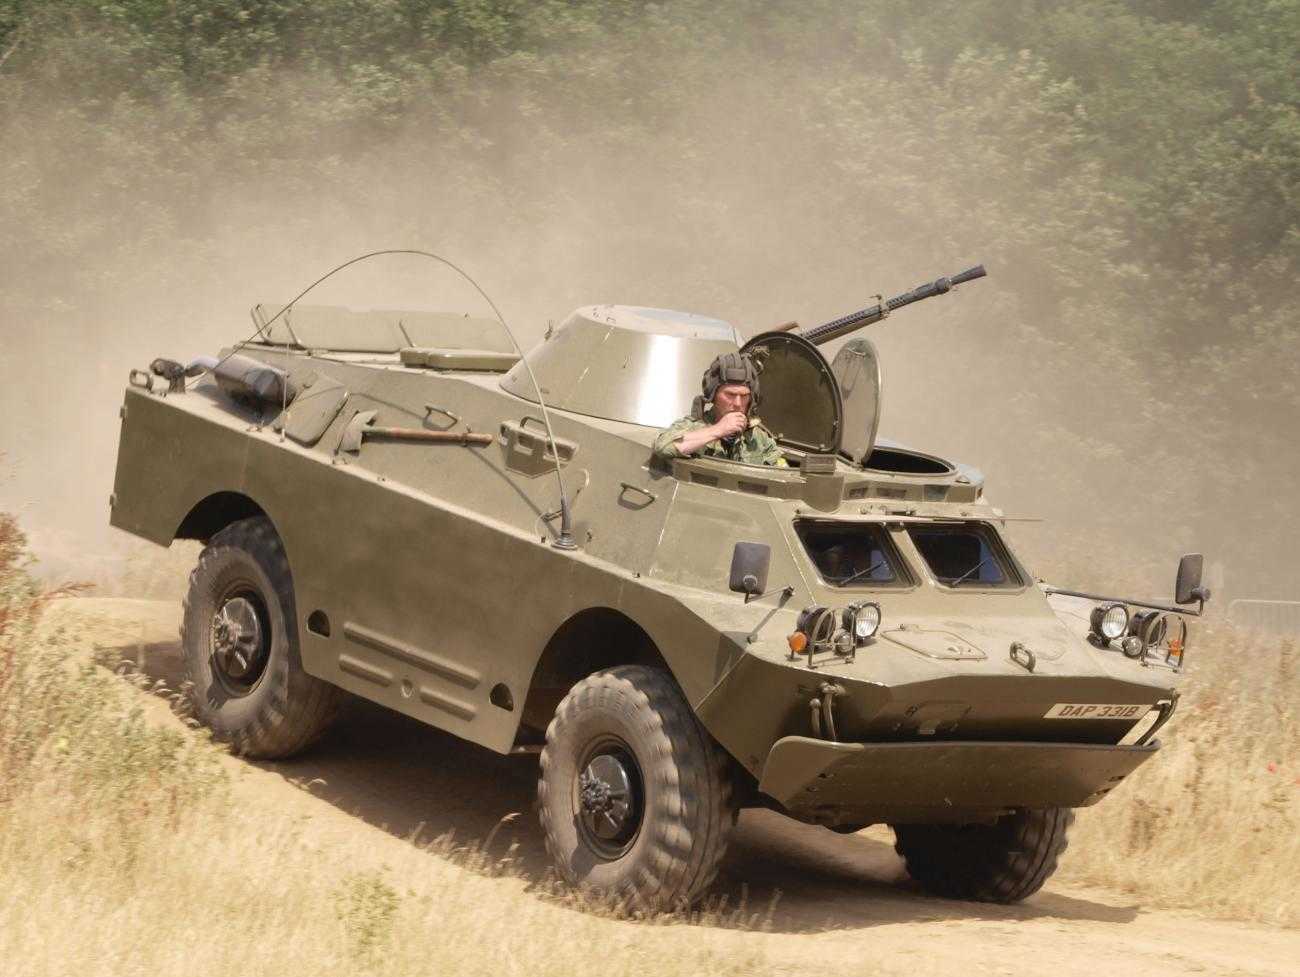 A BRDM-2, one of the Polish vehicles allegedly shipped to Uganda via the Ukraine.